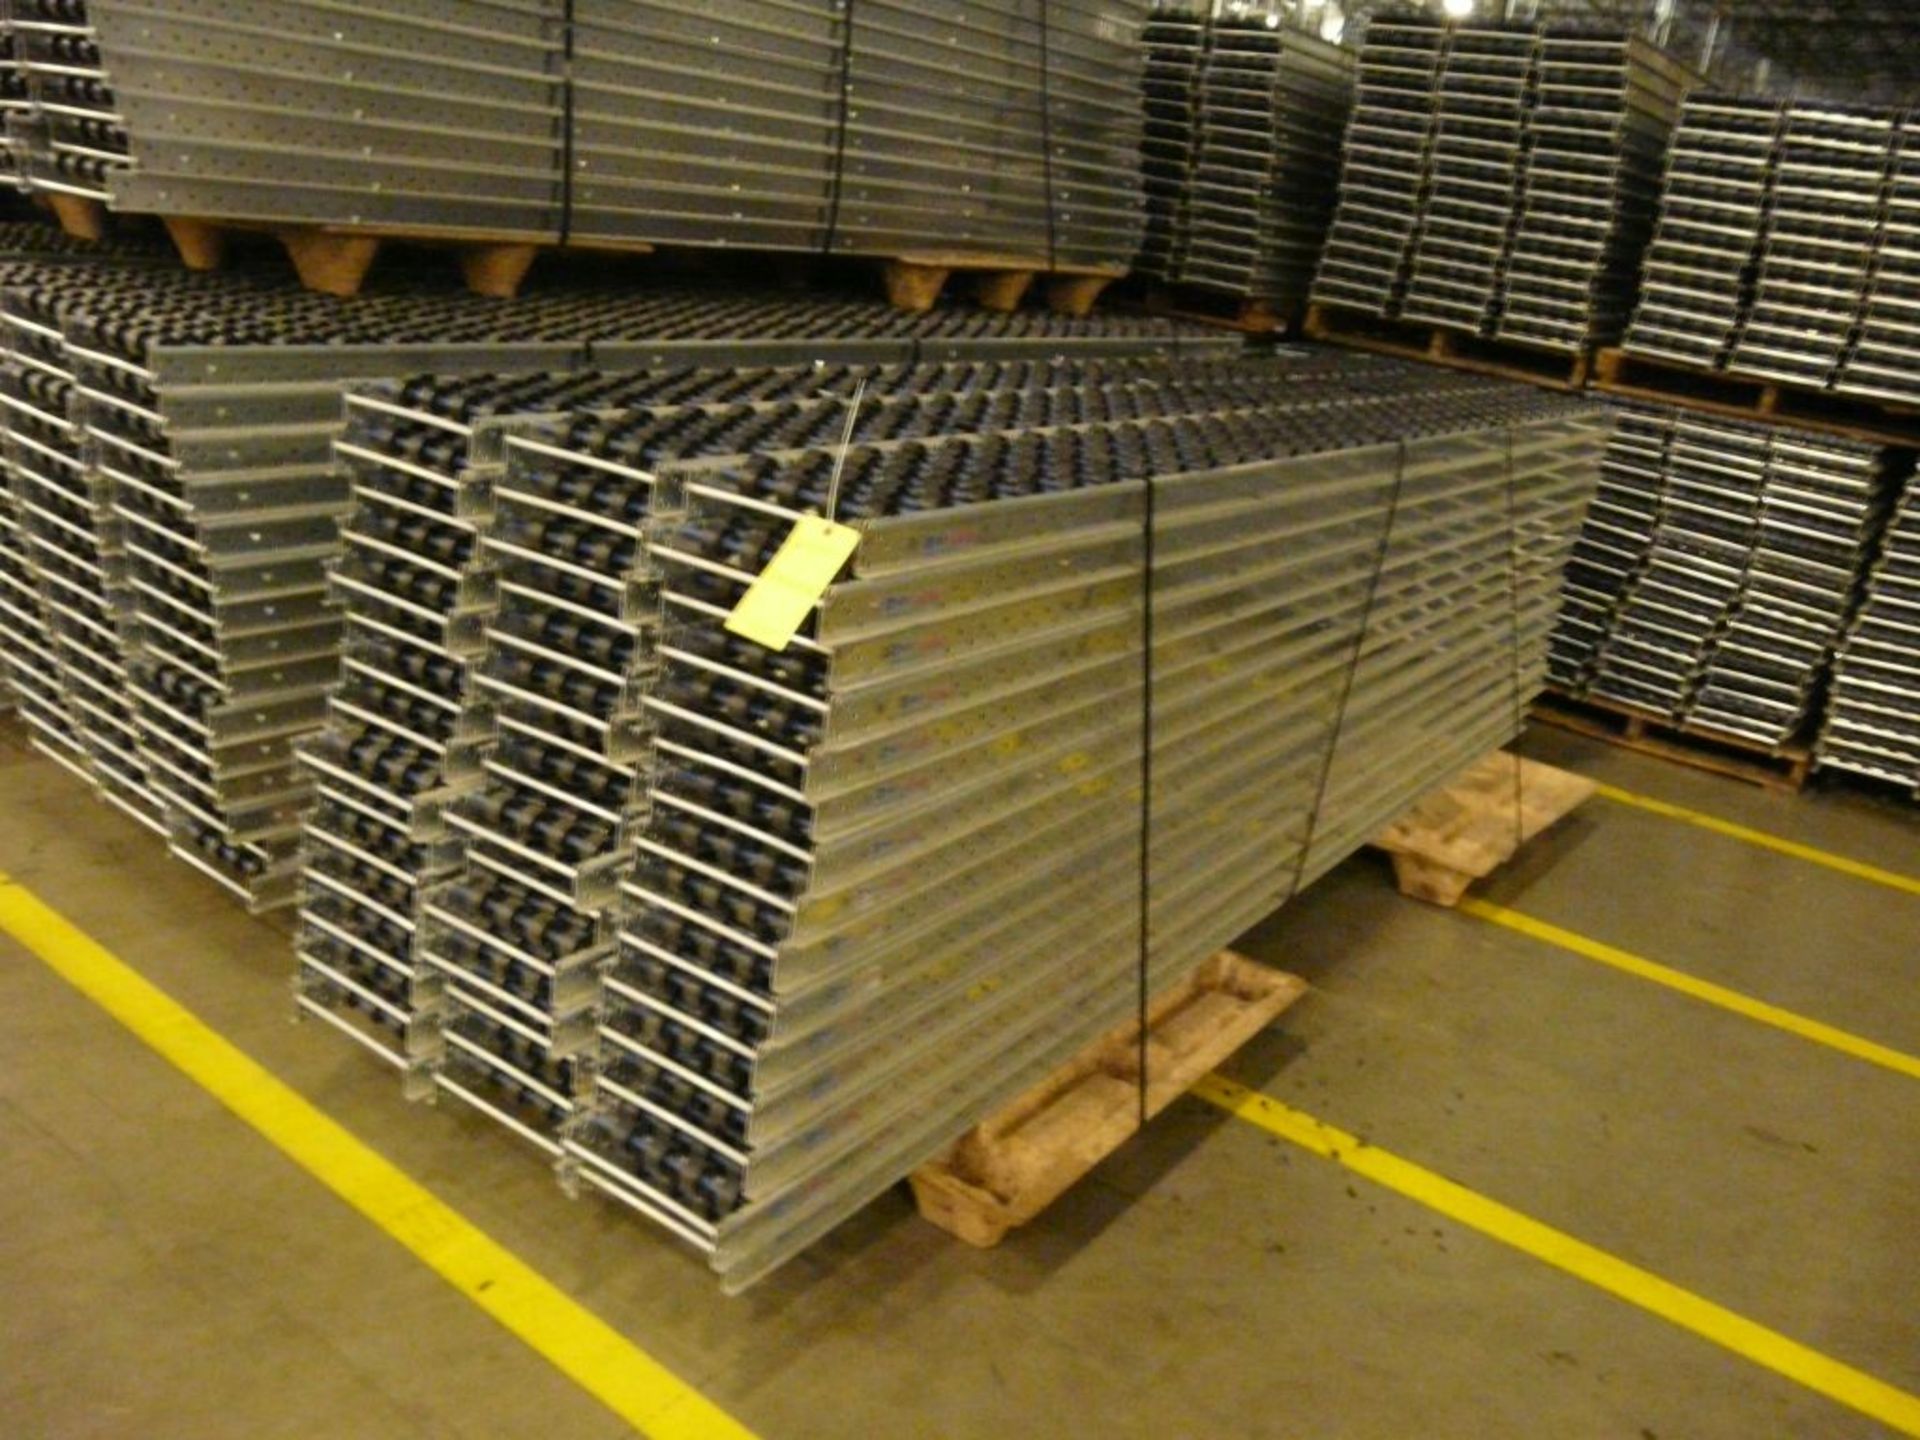 Lot of (90) SpanTrack Wheelbed Carton Flow Conveyors - 11.5'L x 11"W; Tag: 223635 - $30 Lot